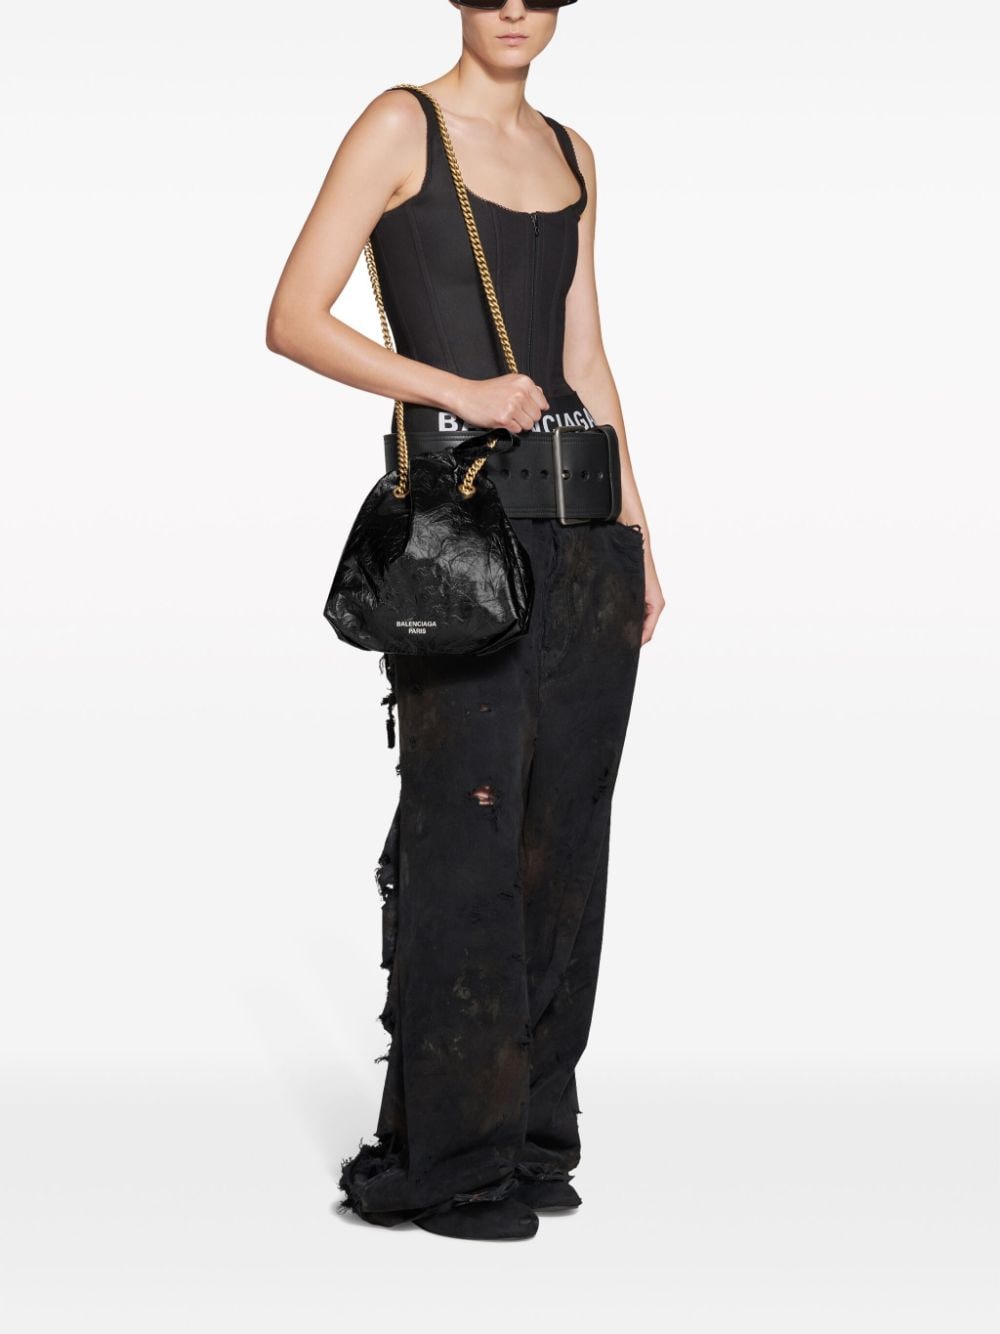 BALENCIAGA Crush Small Black Leather Tote with Gold-Tone Chain and Eco-Aware Rating